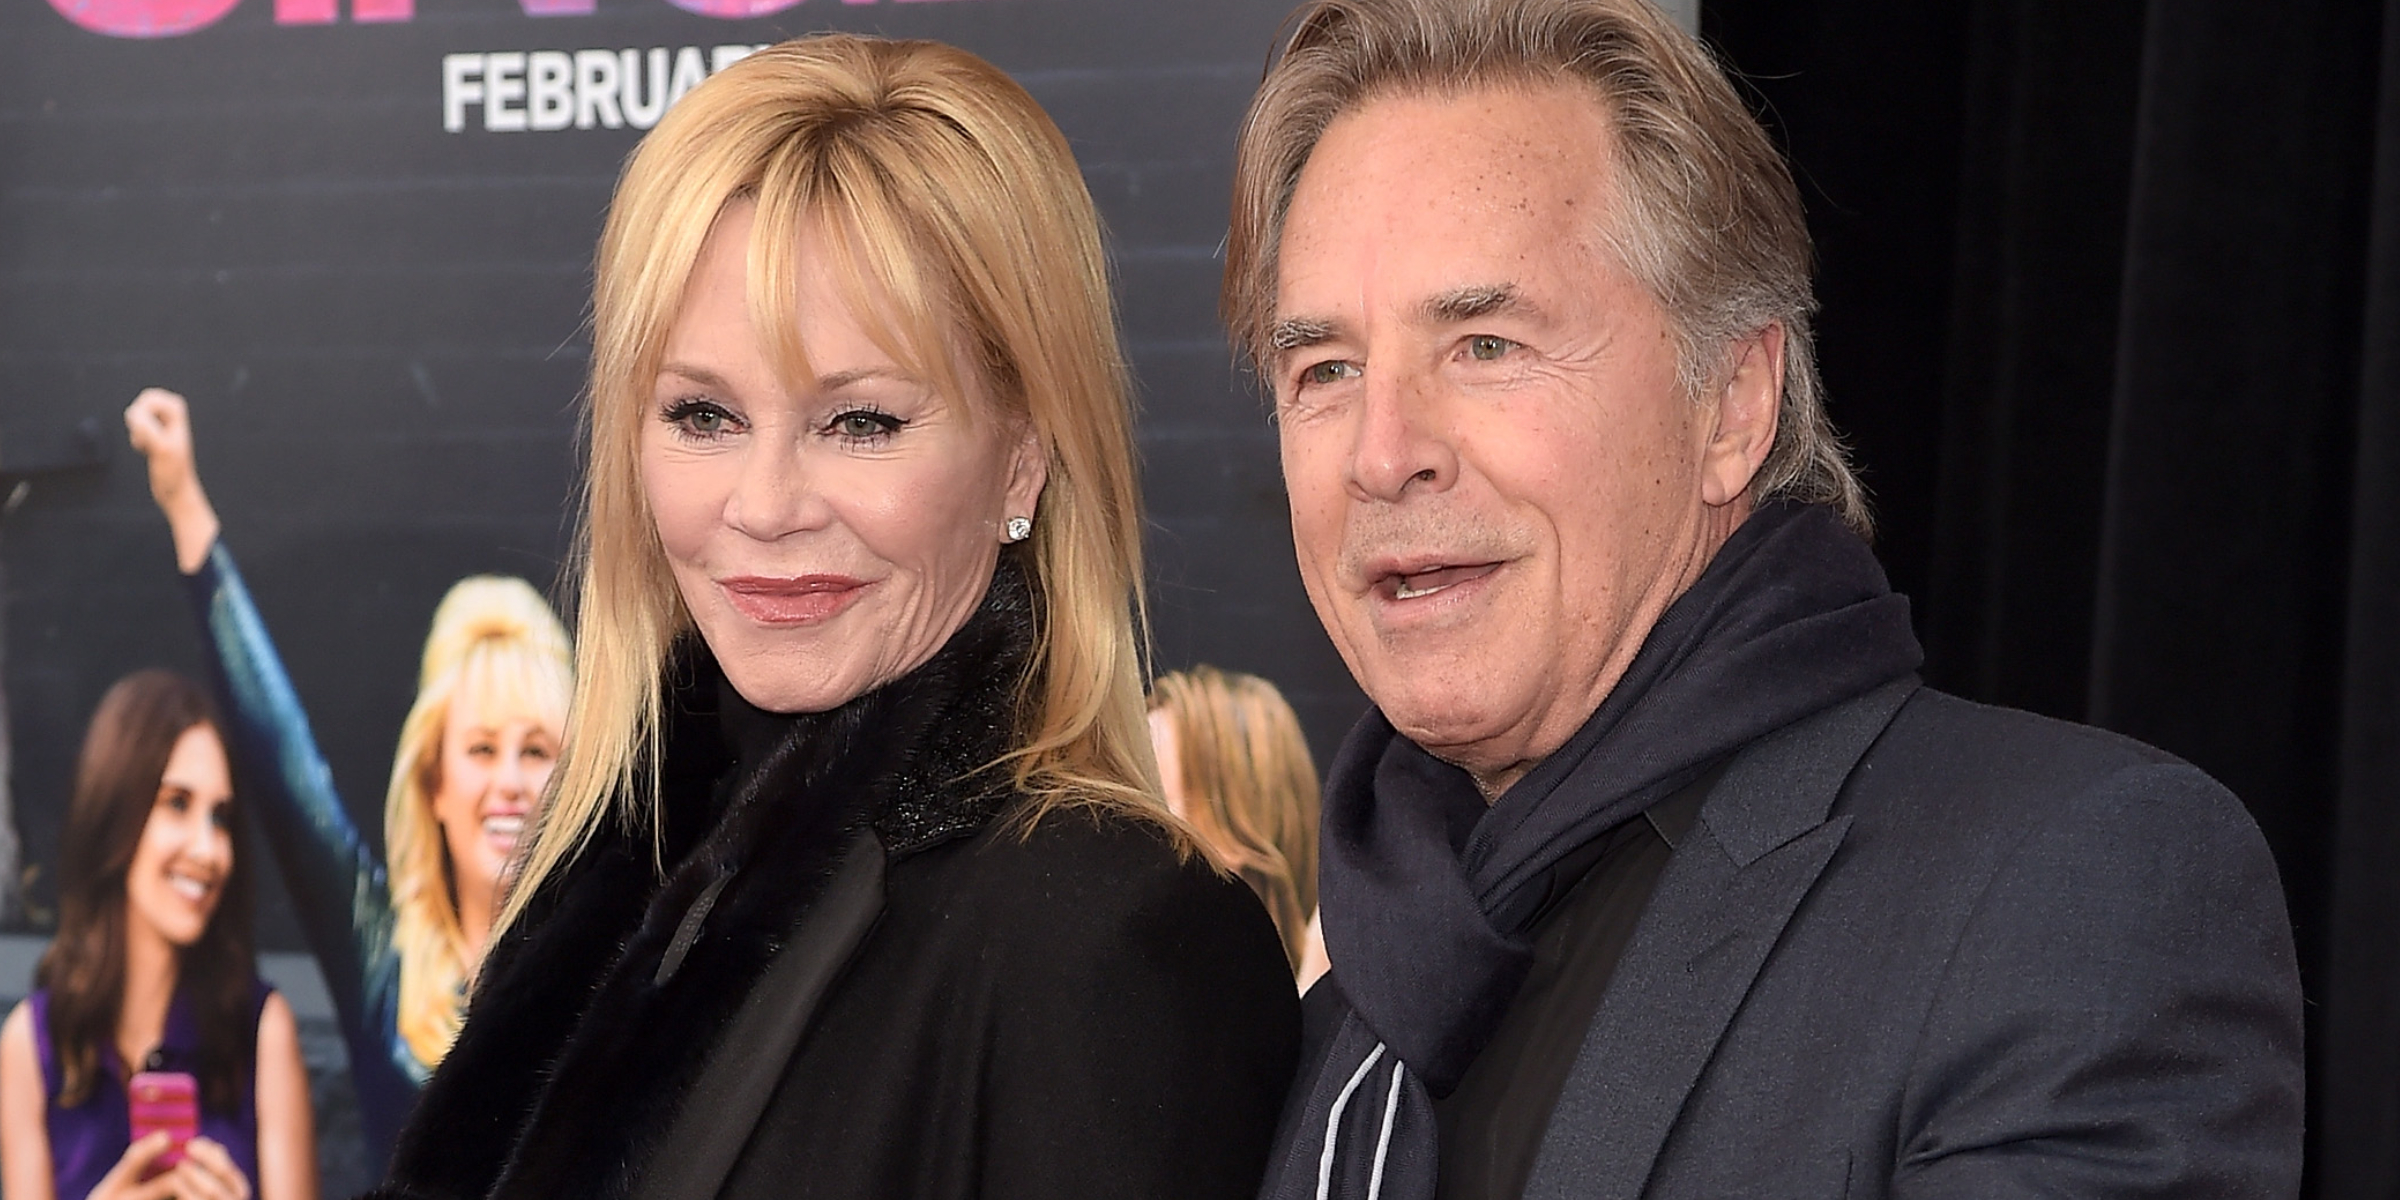 Melanie Griffith and Don Johnson | Source: Getty Images